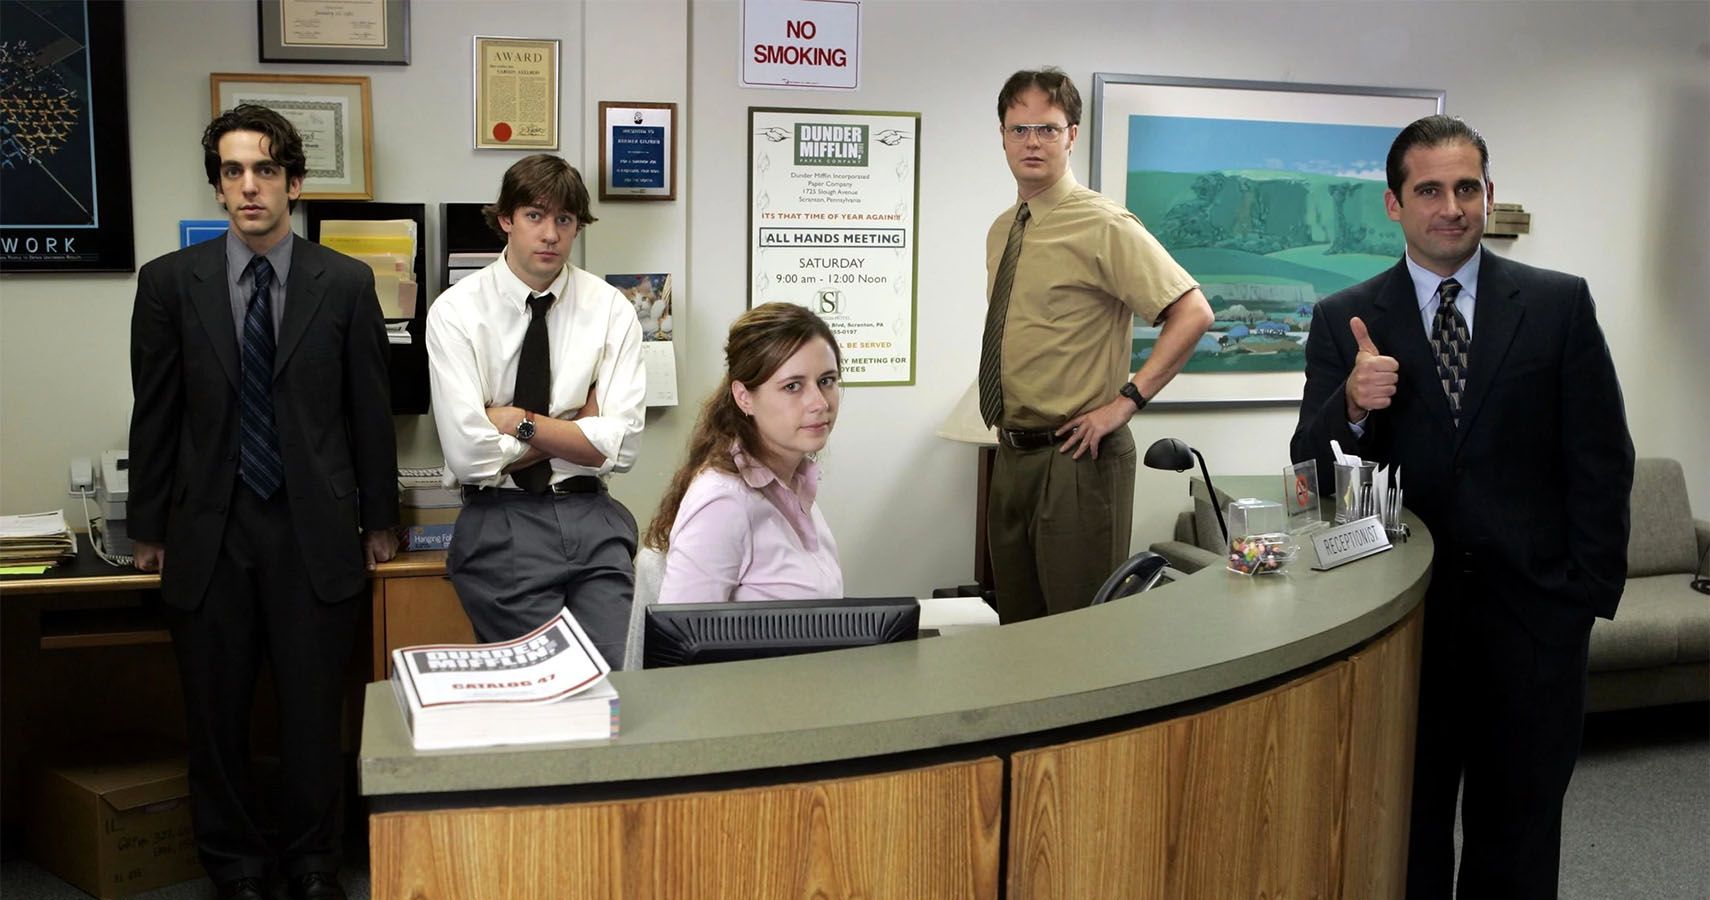 Ranked All Seasons Of The Office